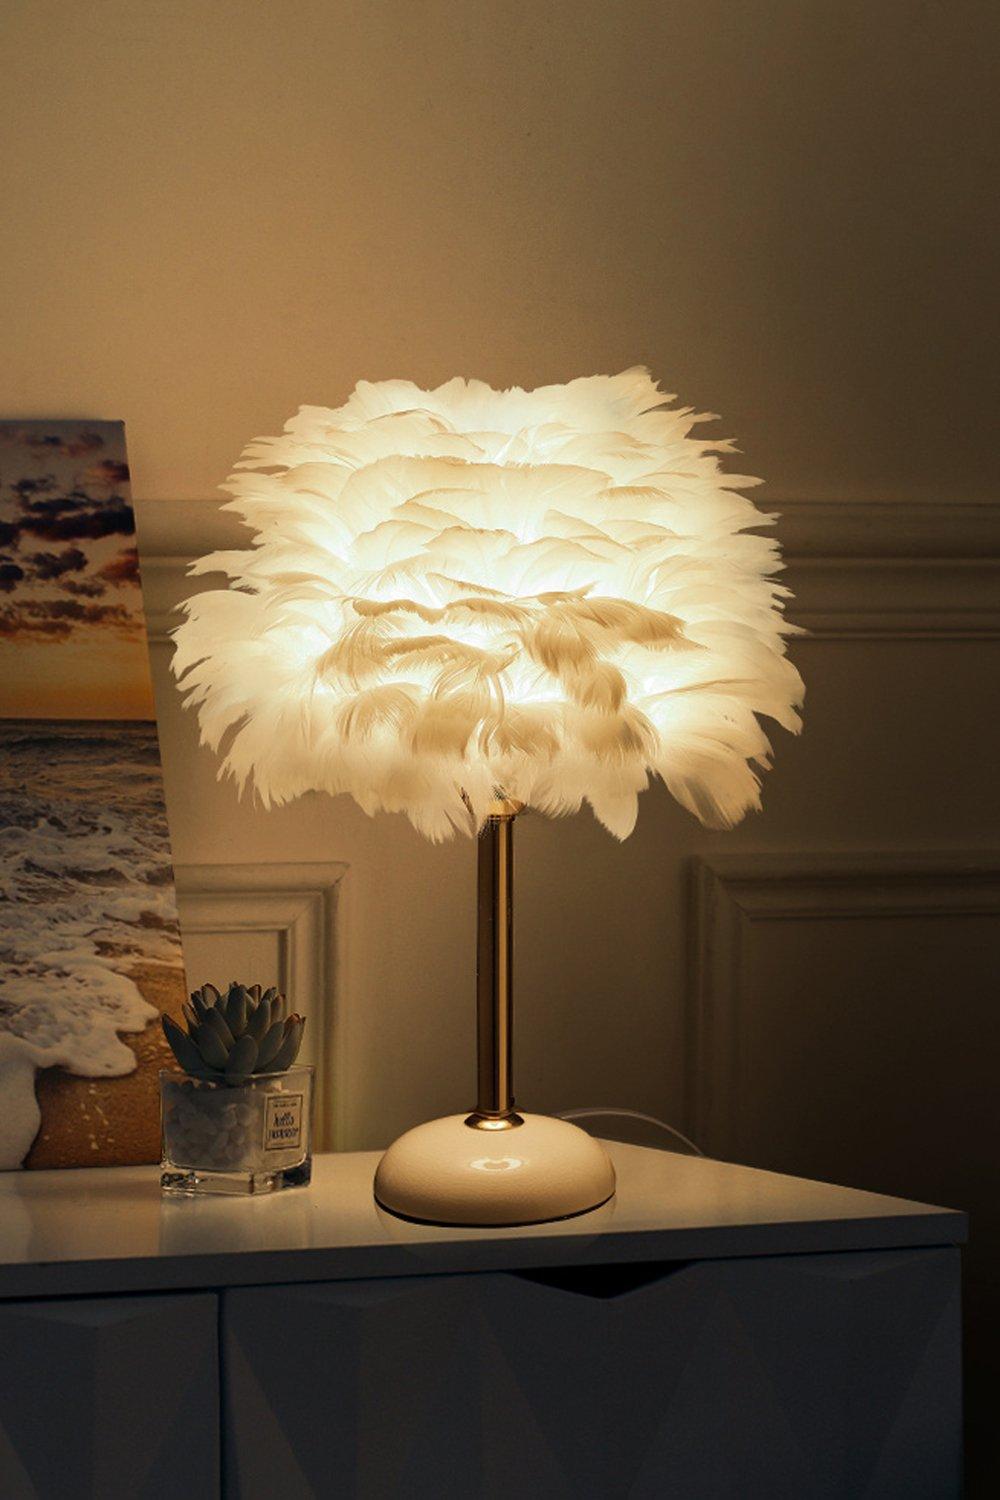 Ceramic Feather Table Lamp with LED Light